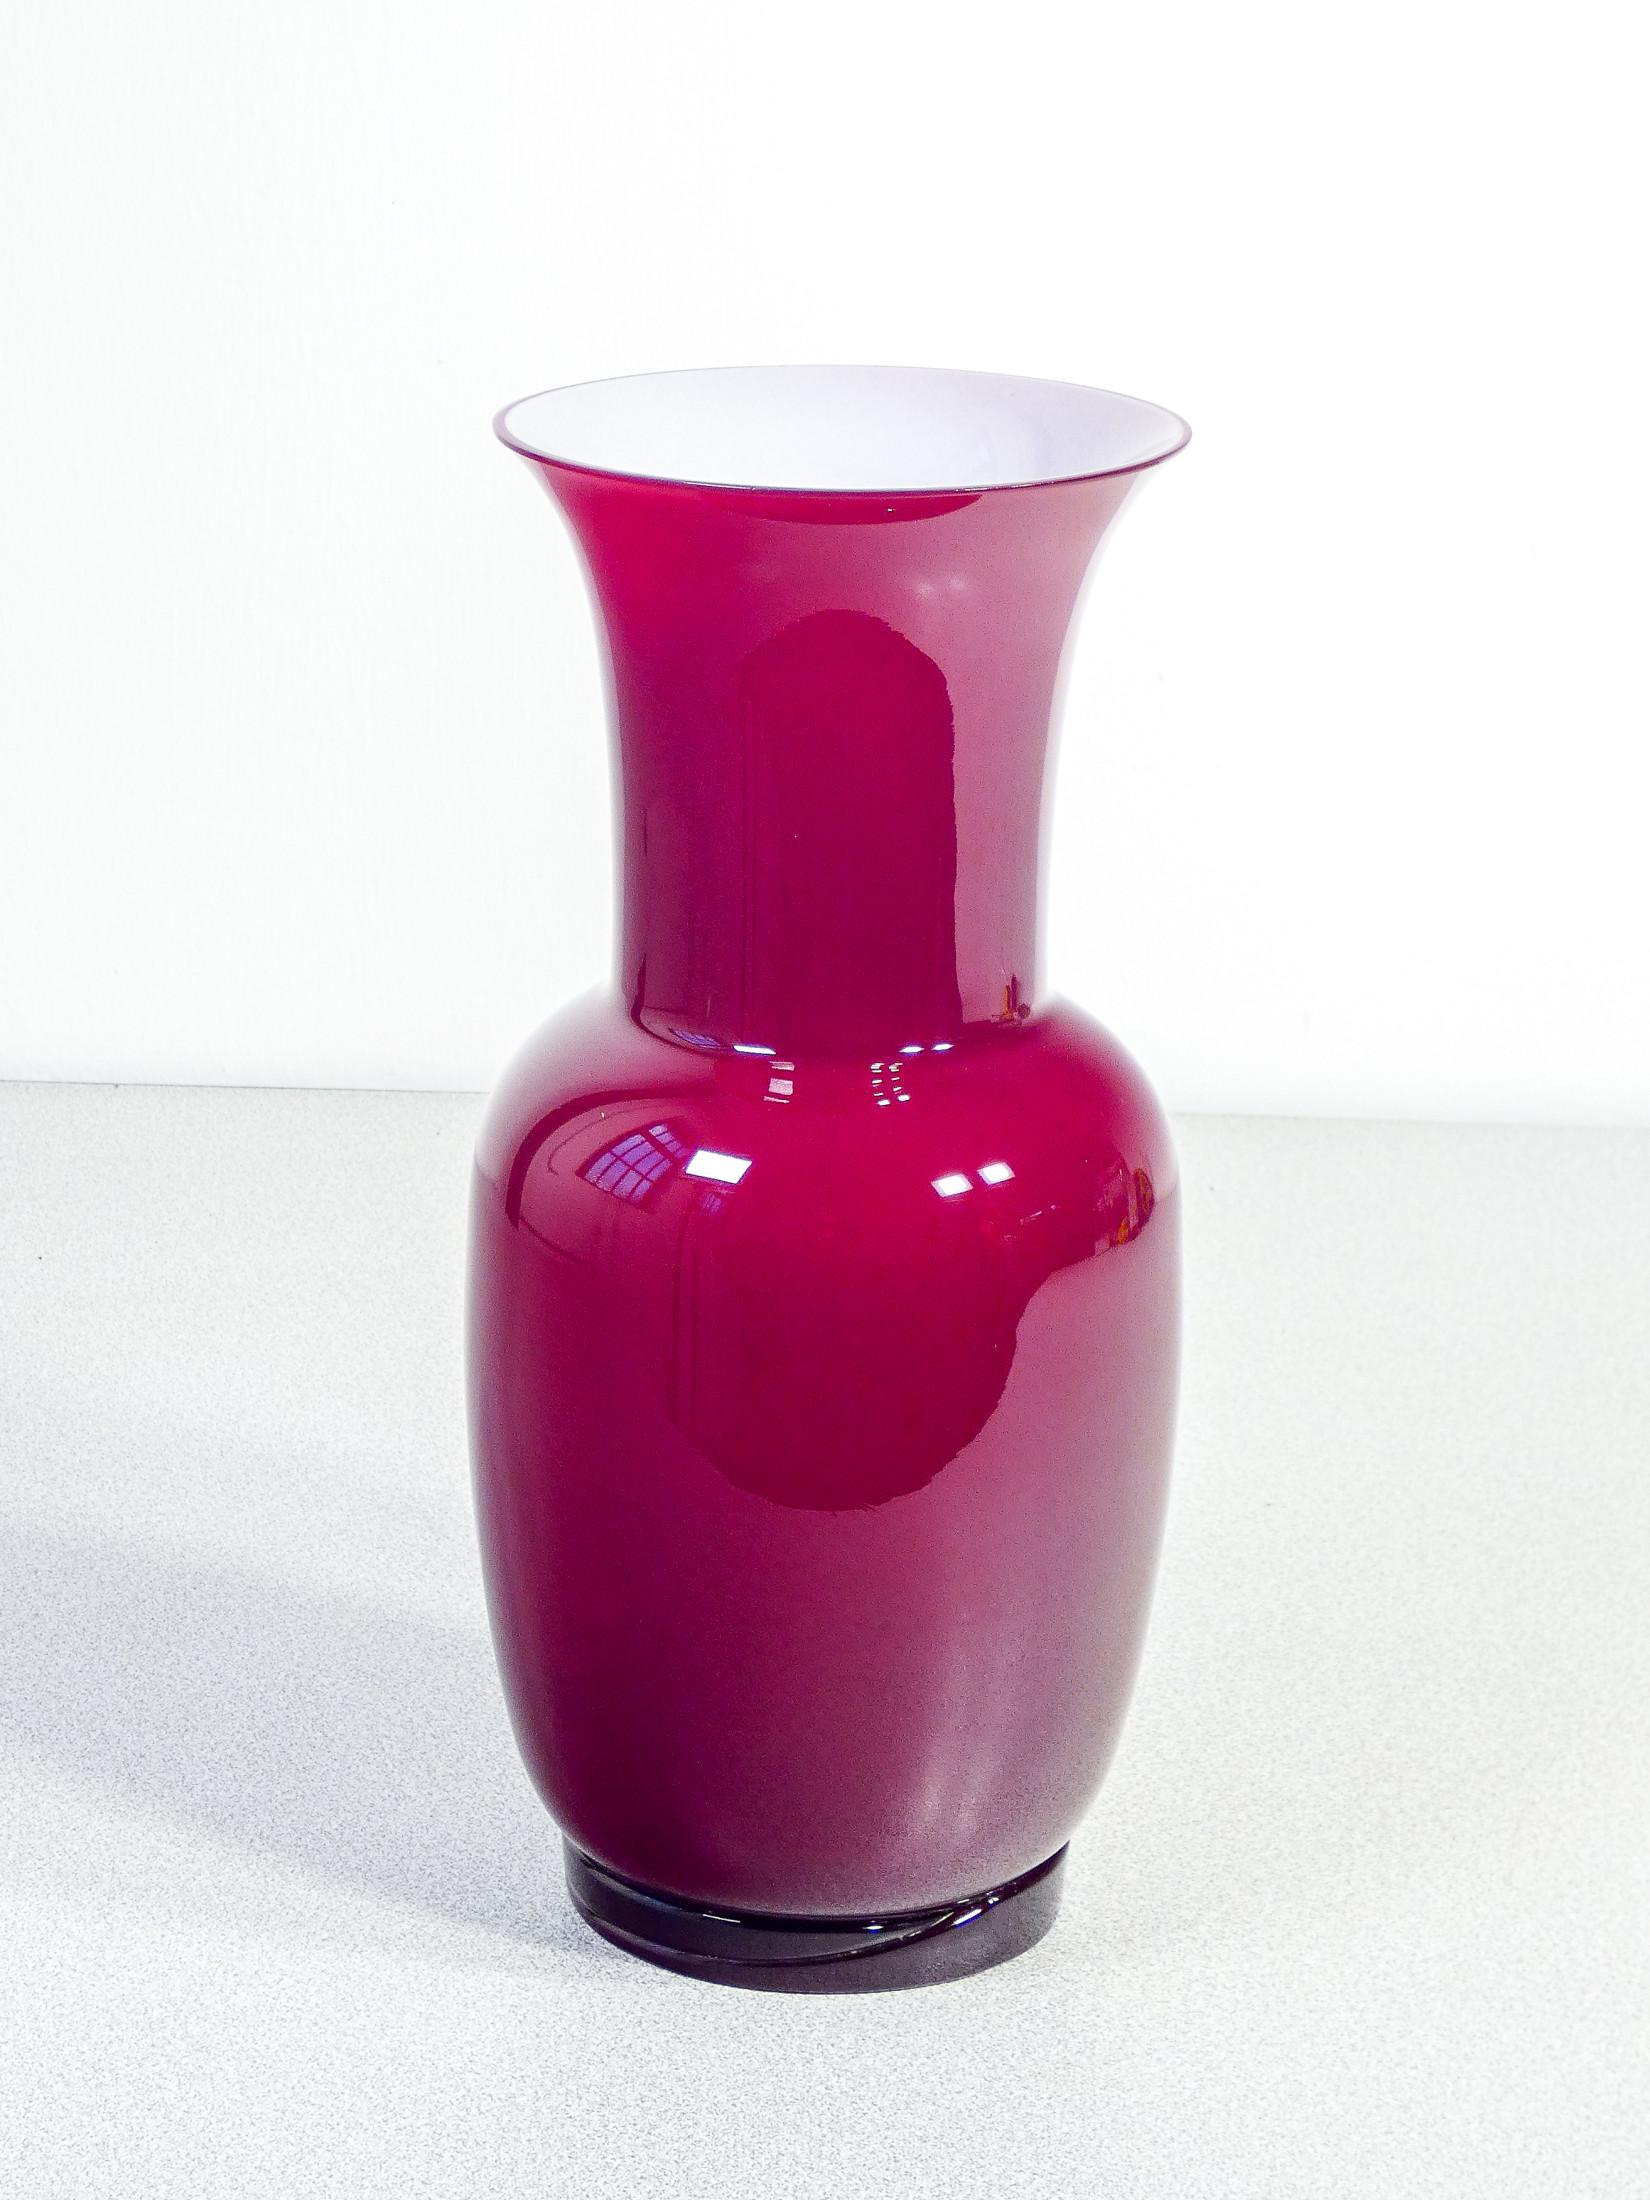 Vase OPALINO
signed VENINI,
original design by Paolo Venini.
Red version

ORIGIN
Italy

PERIOD
1992

DESIGNER
It is presented in refined colours, made unique by the ancient and complex processing of milky glass, born in the 15th century